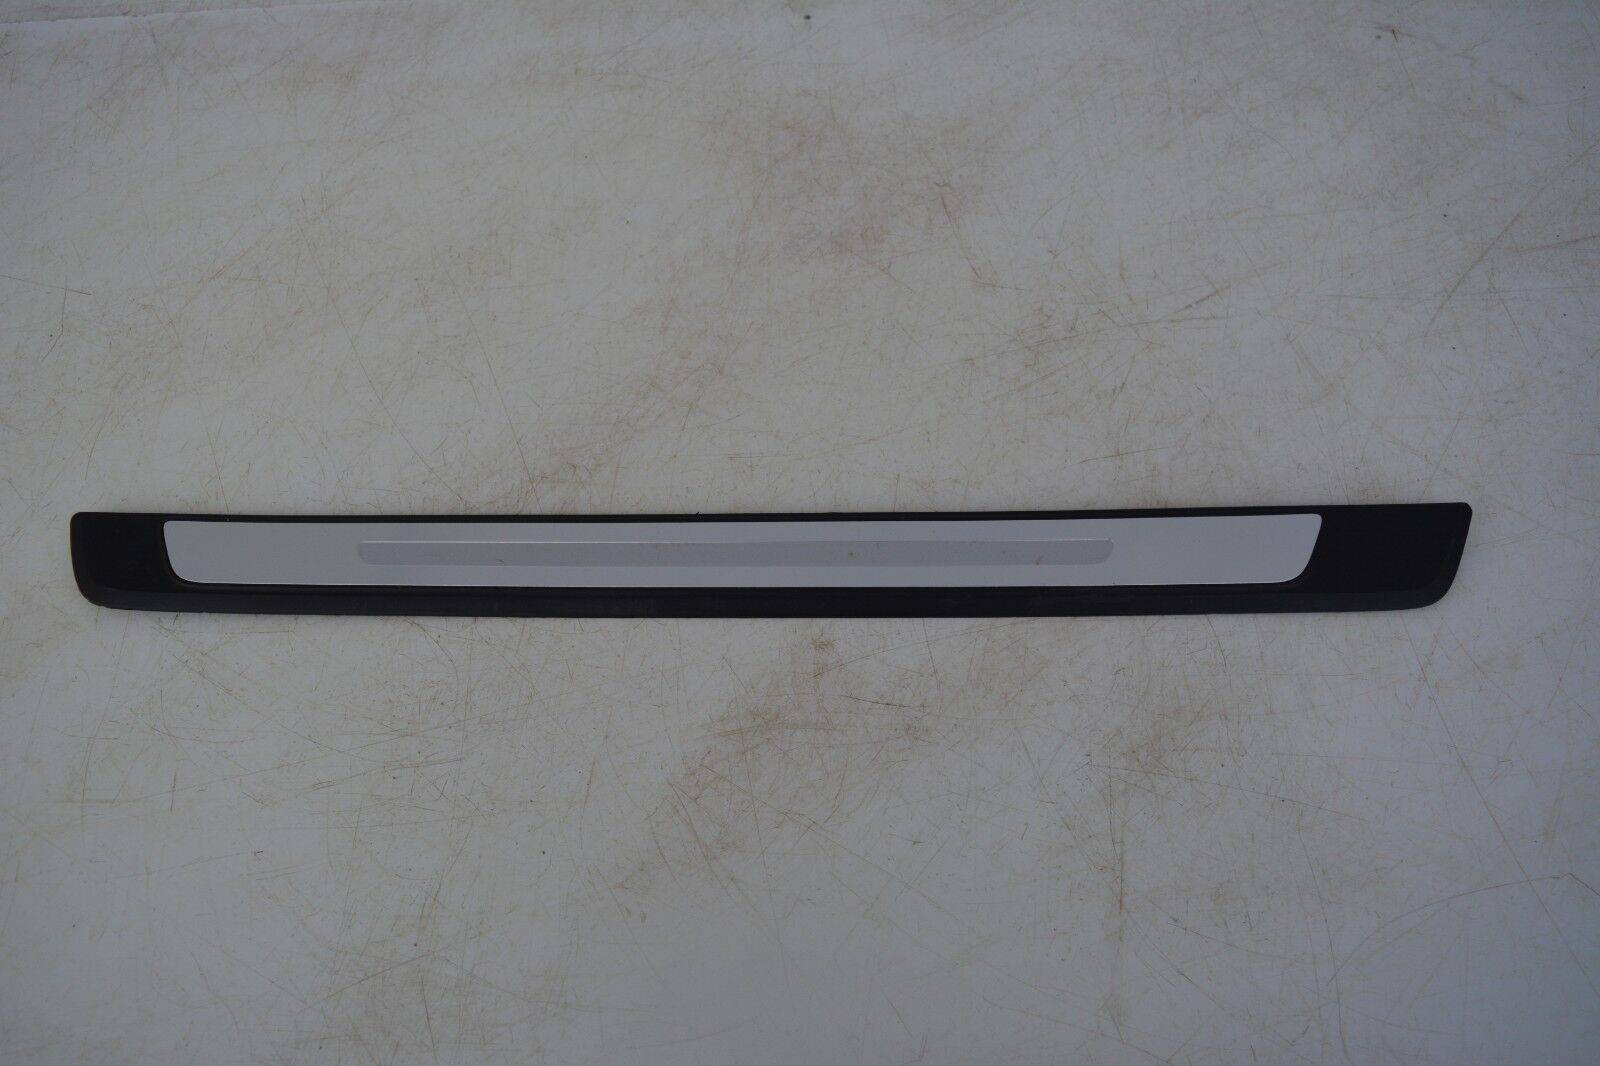 AUDI A4 DOOR SILL ENTRY TRIM FRONT LEFT 2015 2018 175367529874